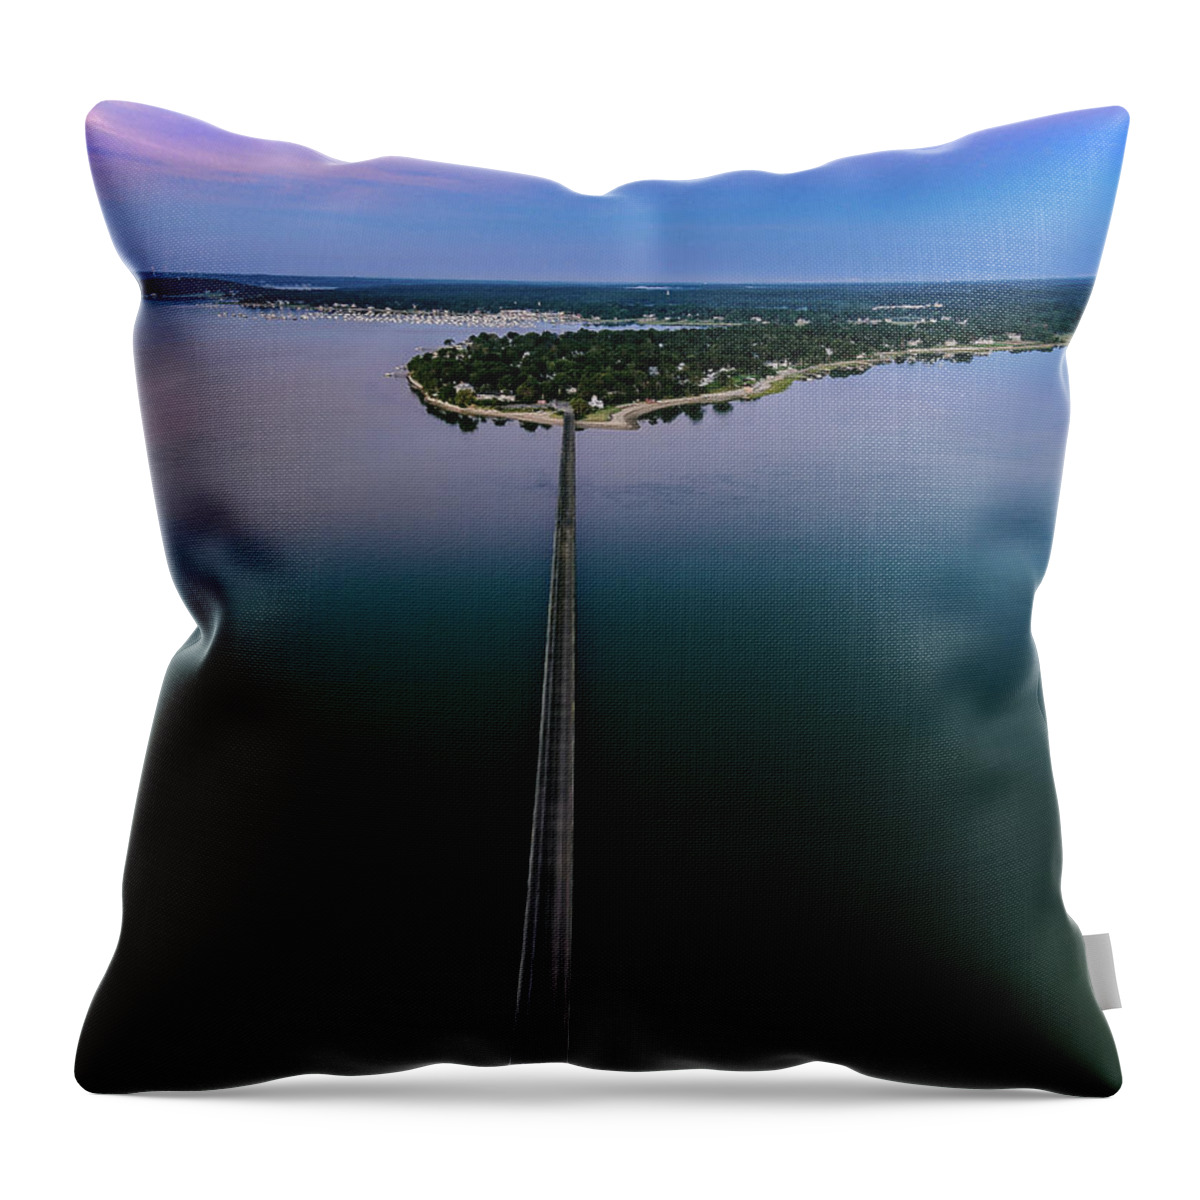 Old Wood Bridge Throw Pillow featuring the photograph Long Bridge Home by William Bretton